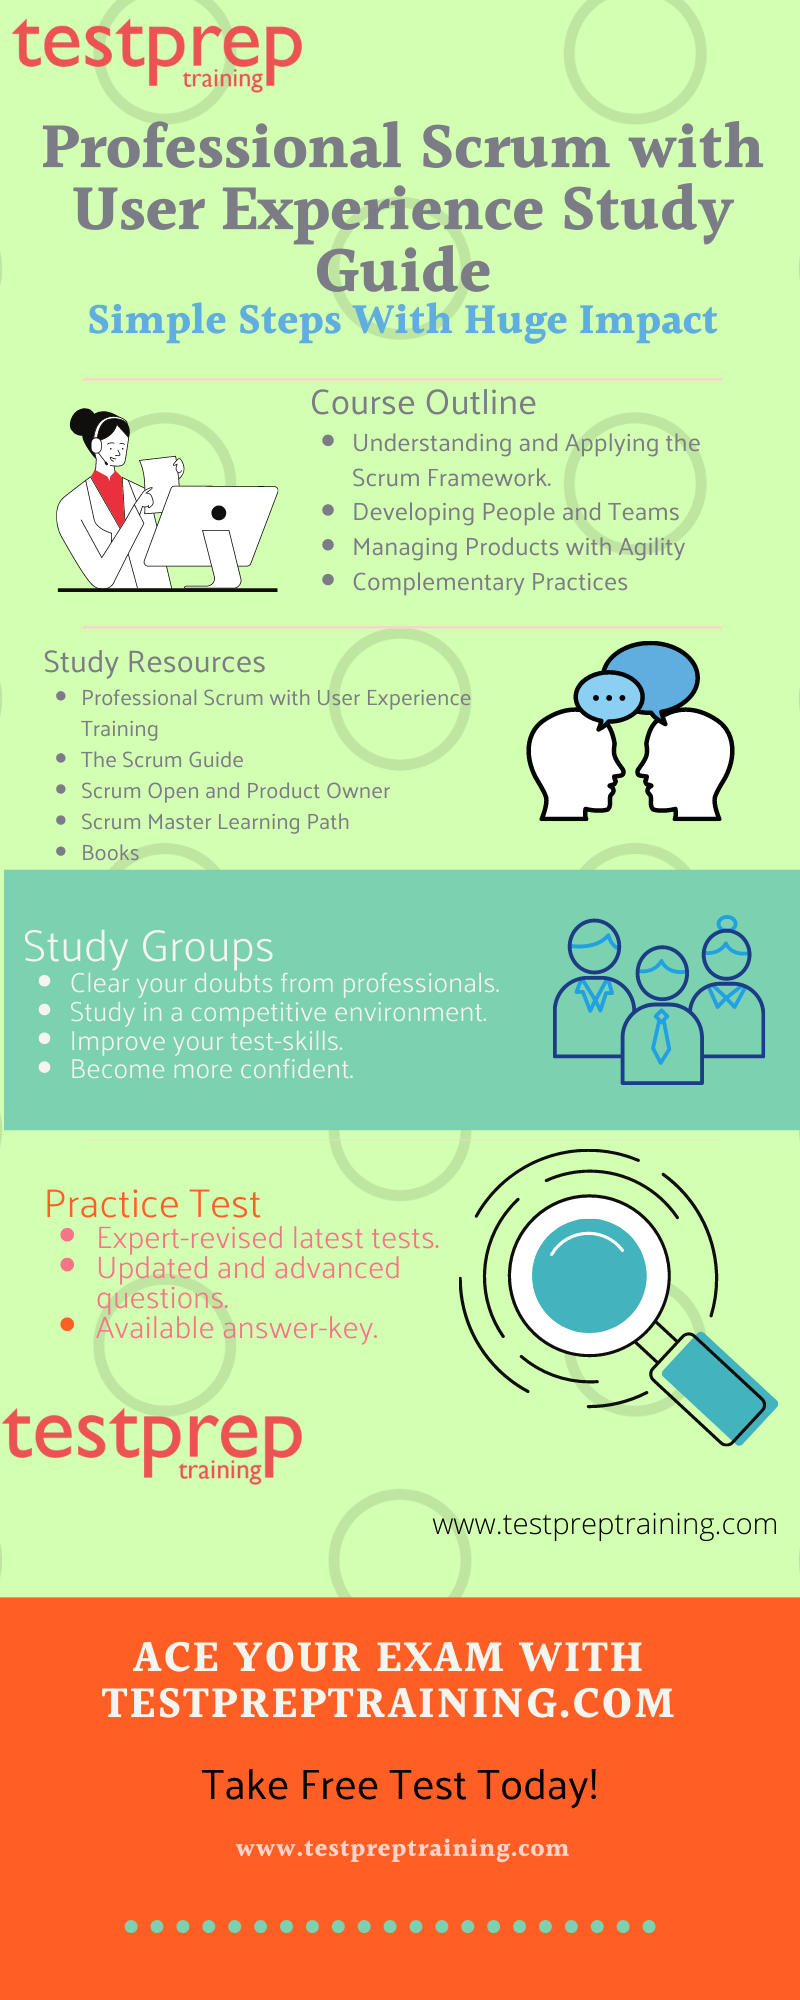 Professional Scrum with User Experience study guide